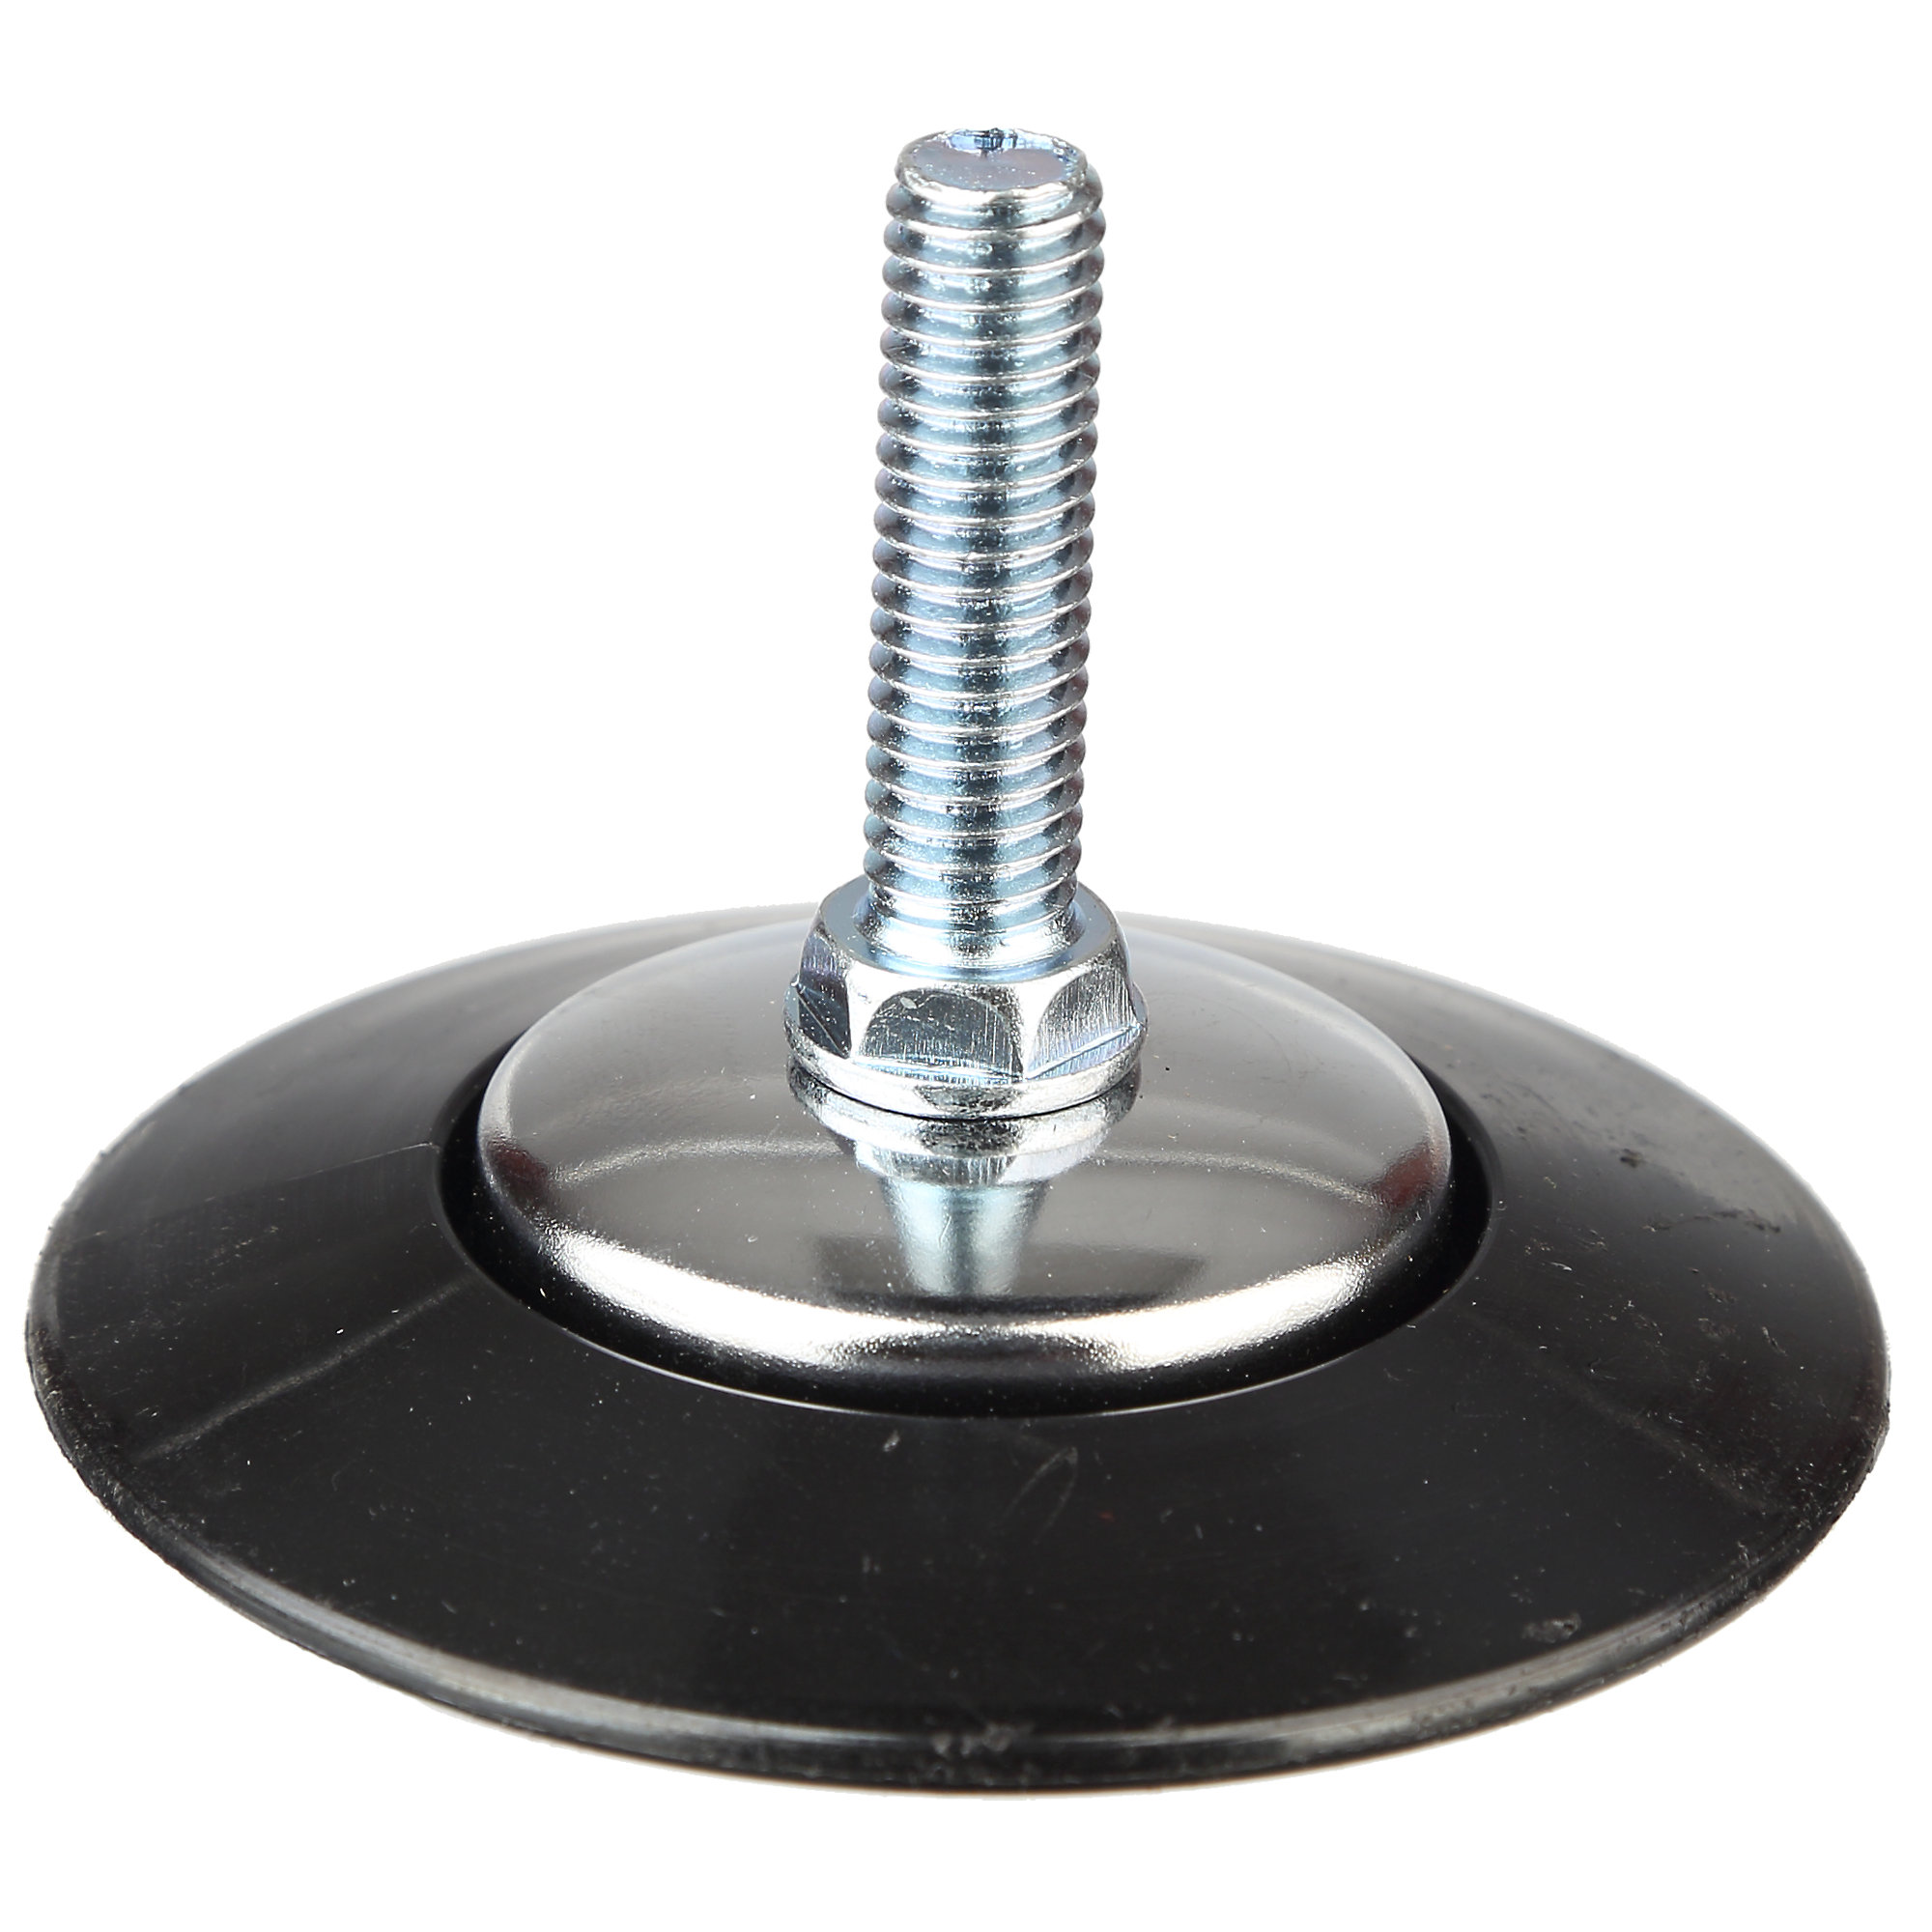 Leveling Foot, 3/8-16 x 1 3/8"